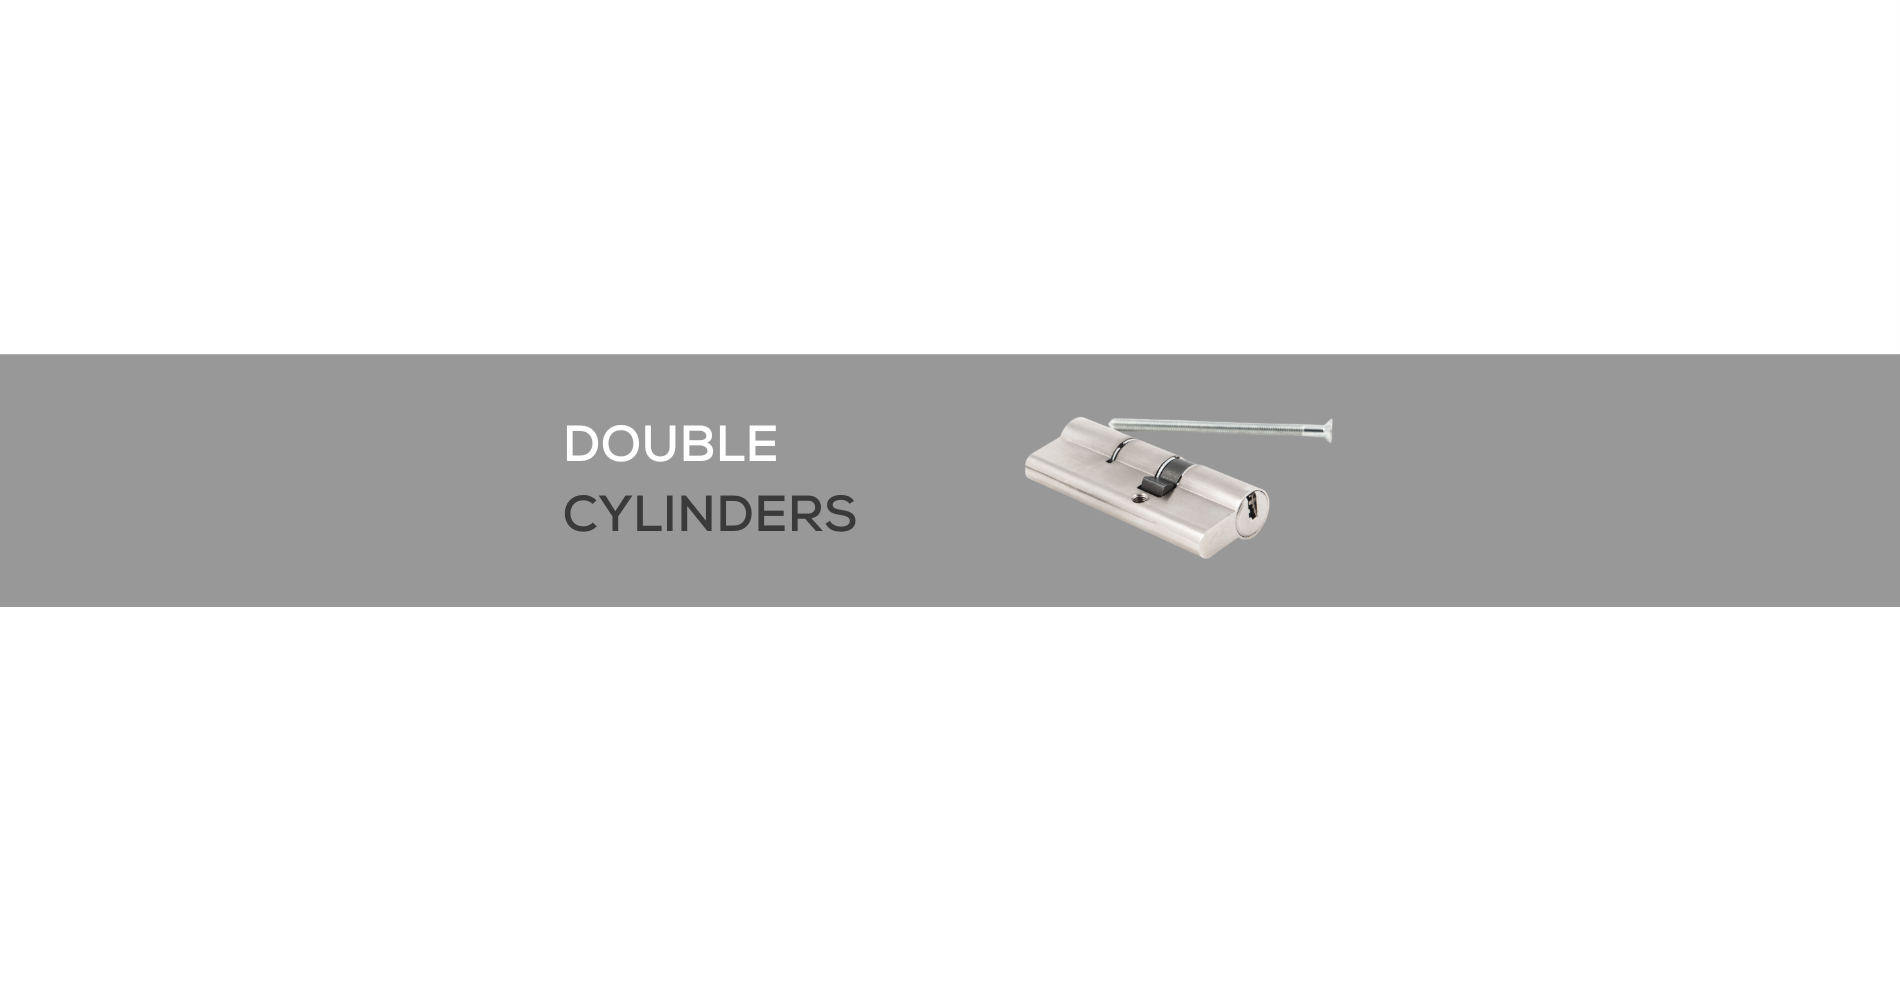 DOUBLE CYLINDERS